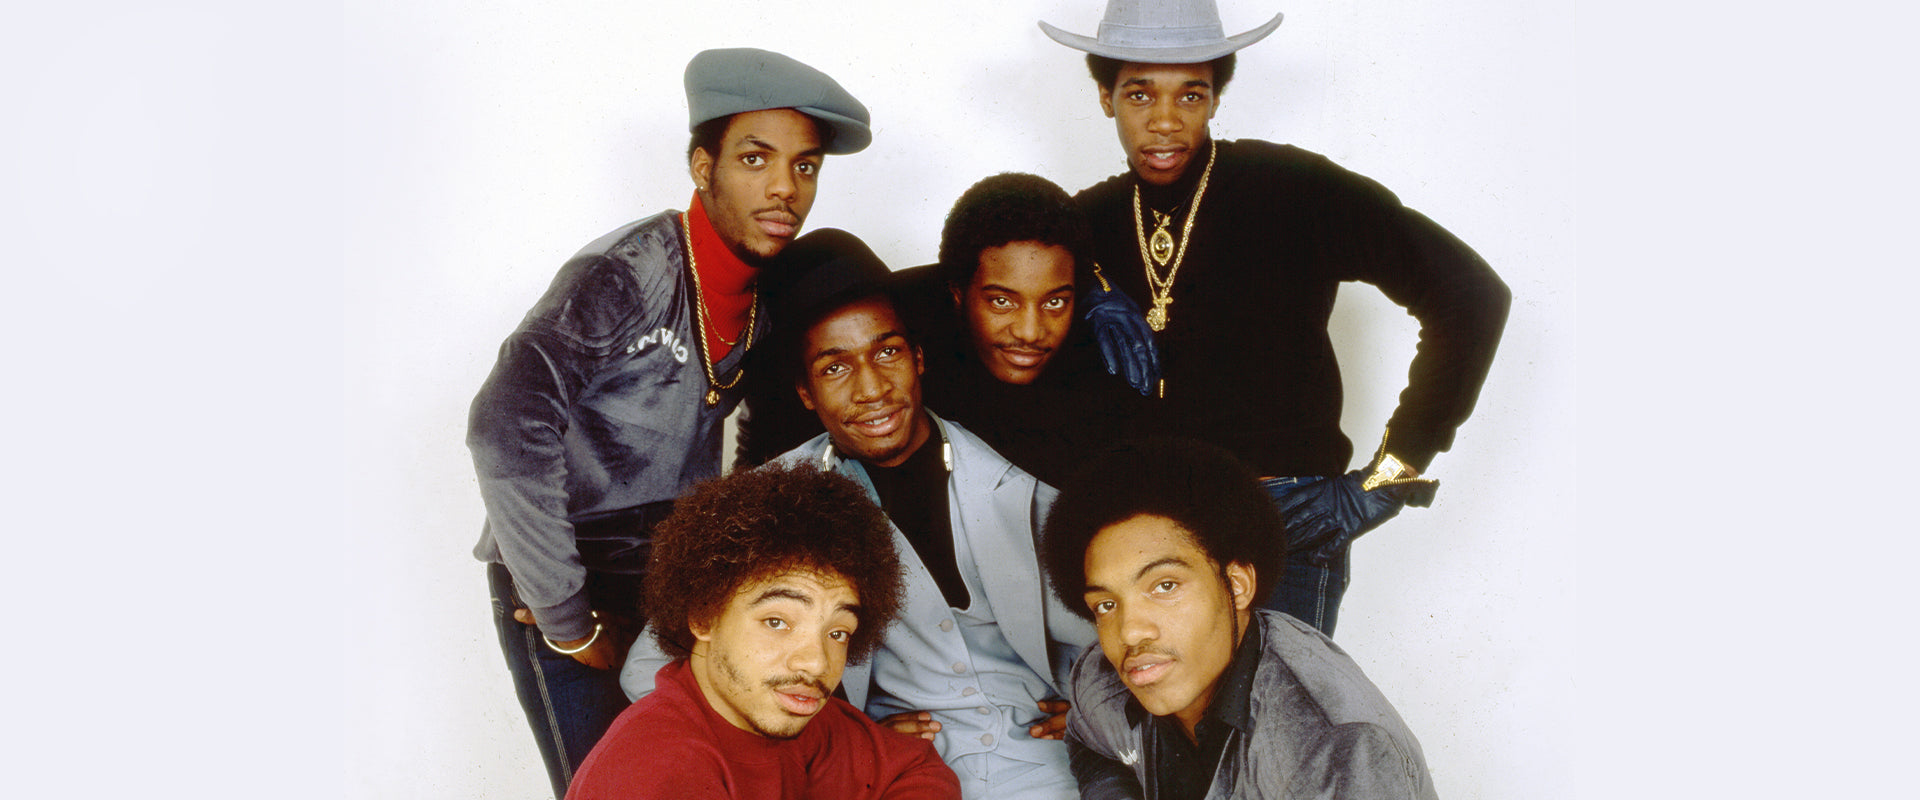 Grandmaster Flash and the Furious Five (Music) - TV Tropes